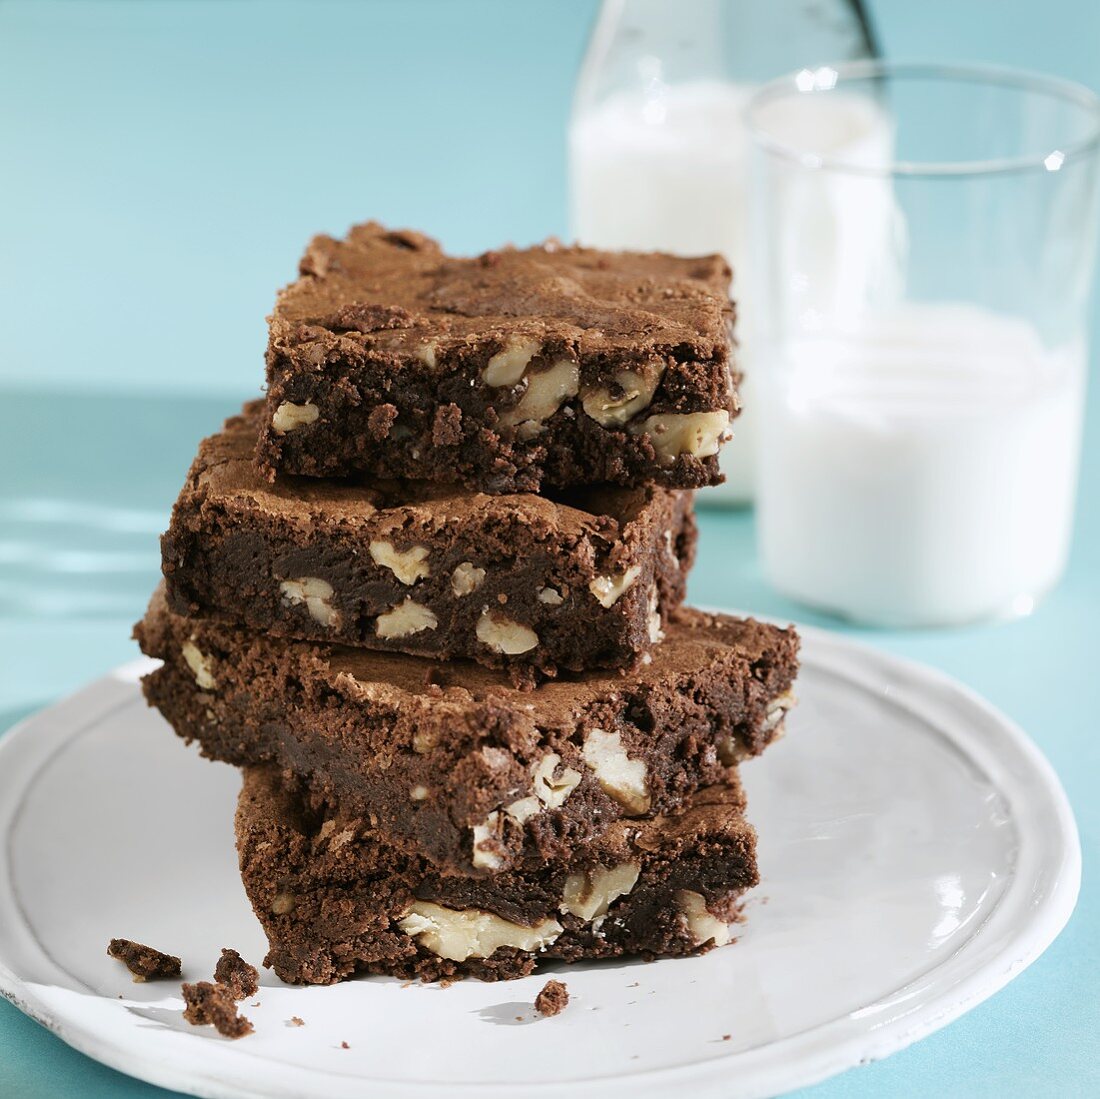 A Stack of Walnut Chocolate Brownies with a Glass and Bottle of Milk